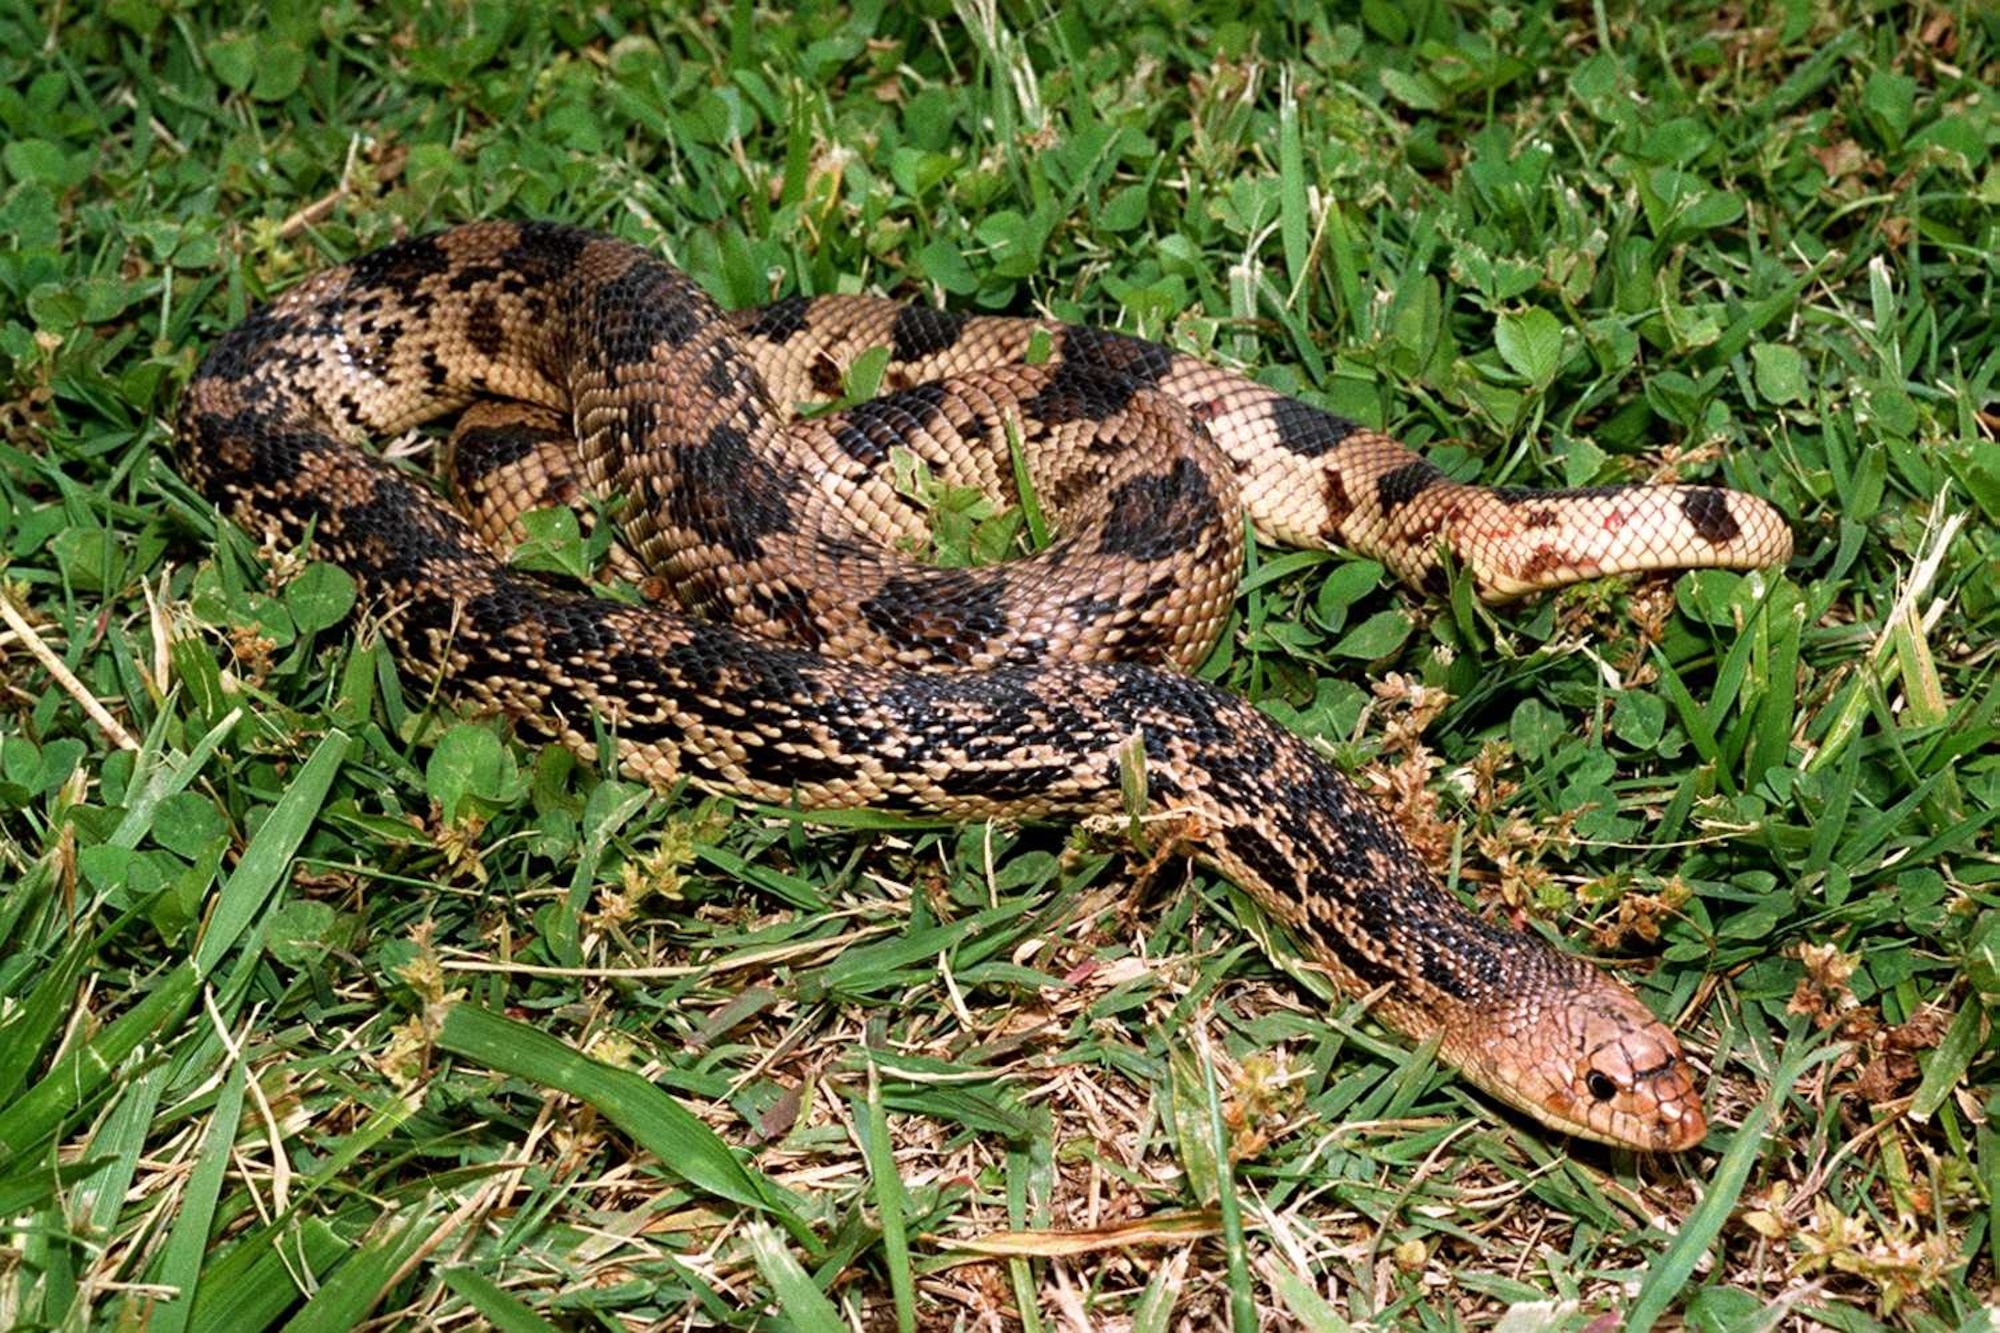 The northern pine snake is a threatened species in Tennessee.  Arnold Air Force Base has one of the largest and best known populations in Tennessee. (U.S. Air Force photo)